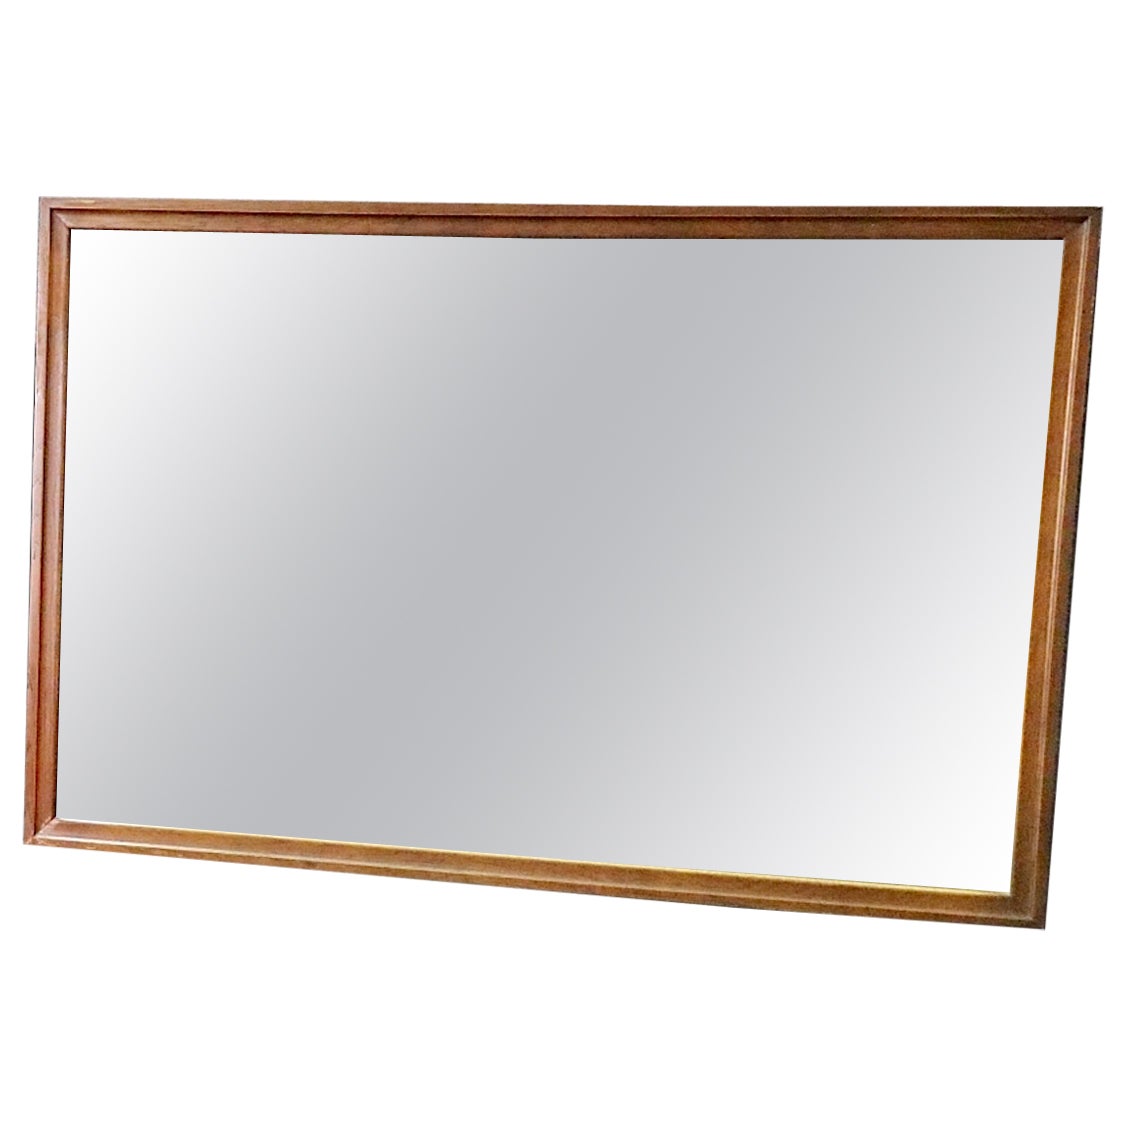 Four Foot Wall Mirror For Sale